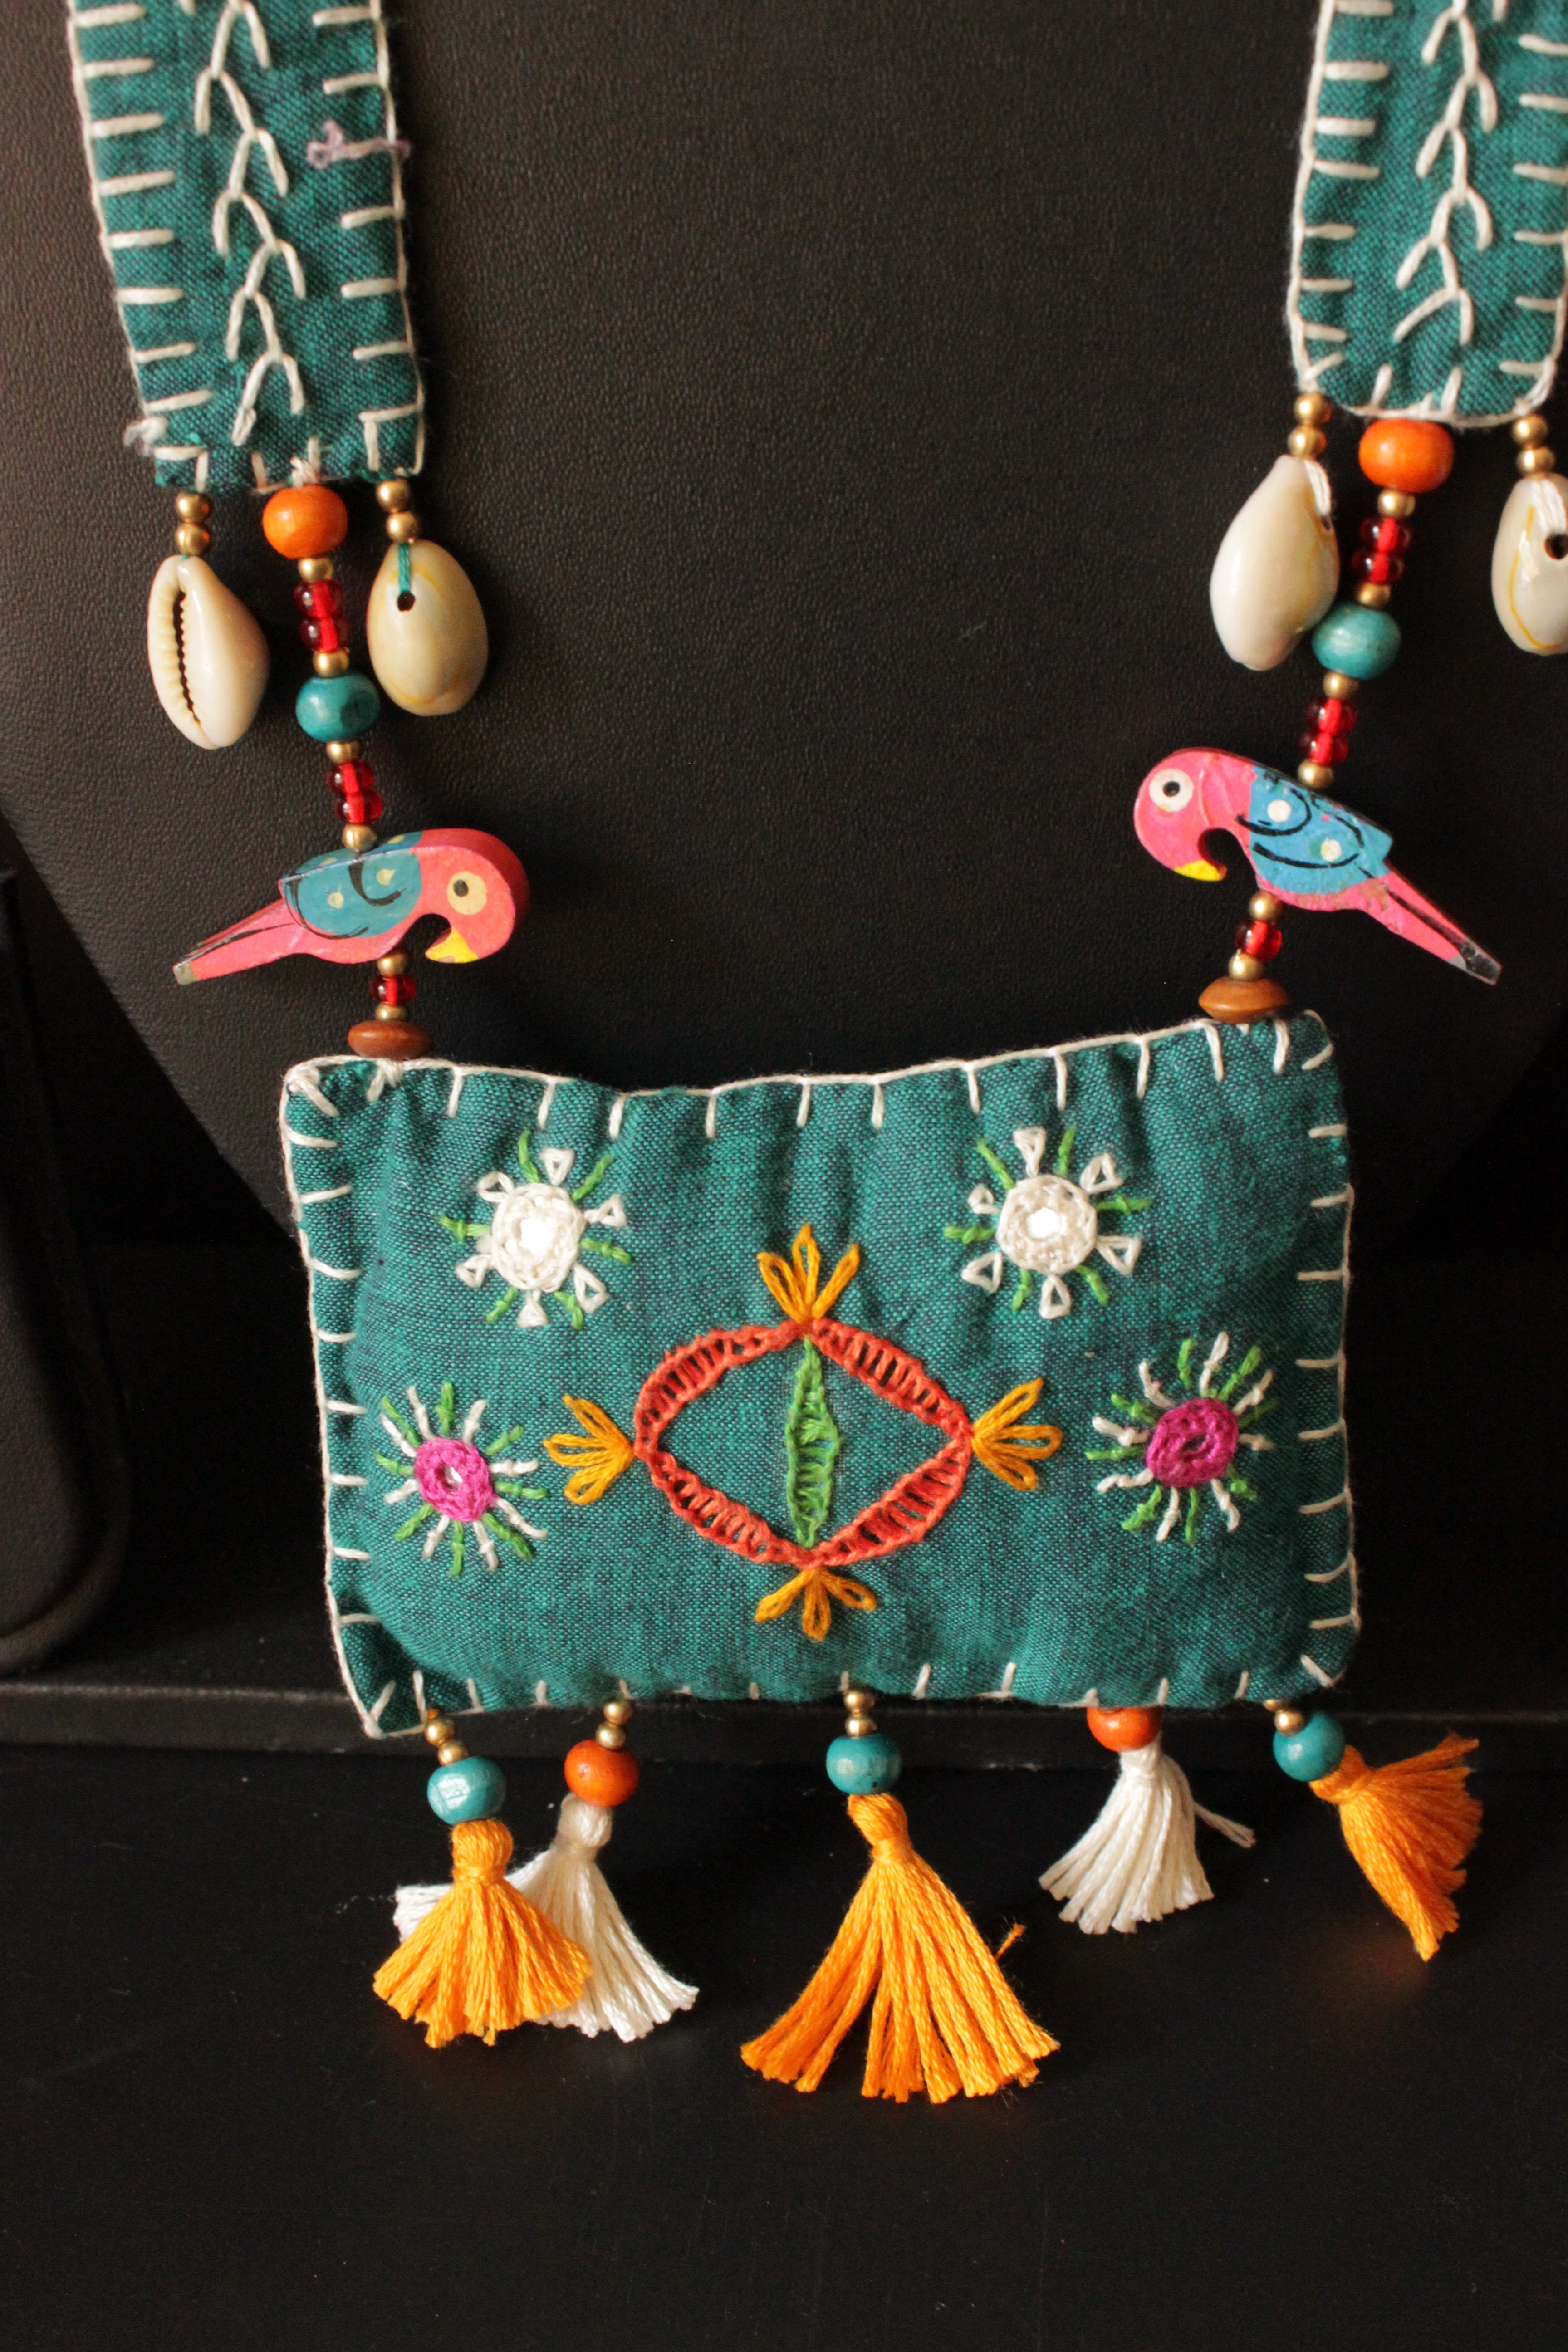 Turquoise Handcrafted Kantha Work Collar Necklace Accentuated with Wooden Parrots